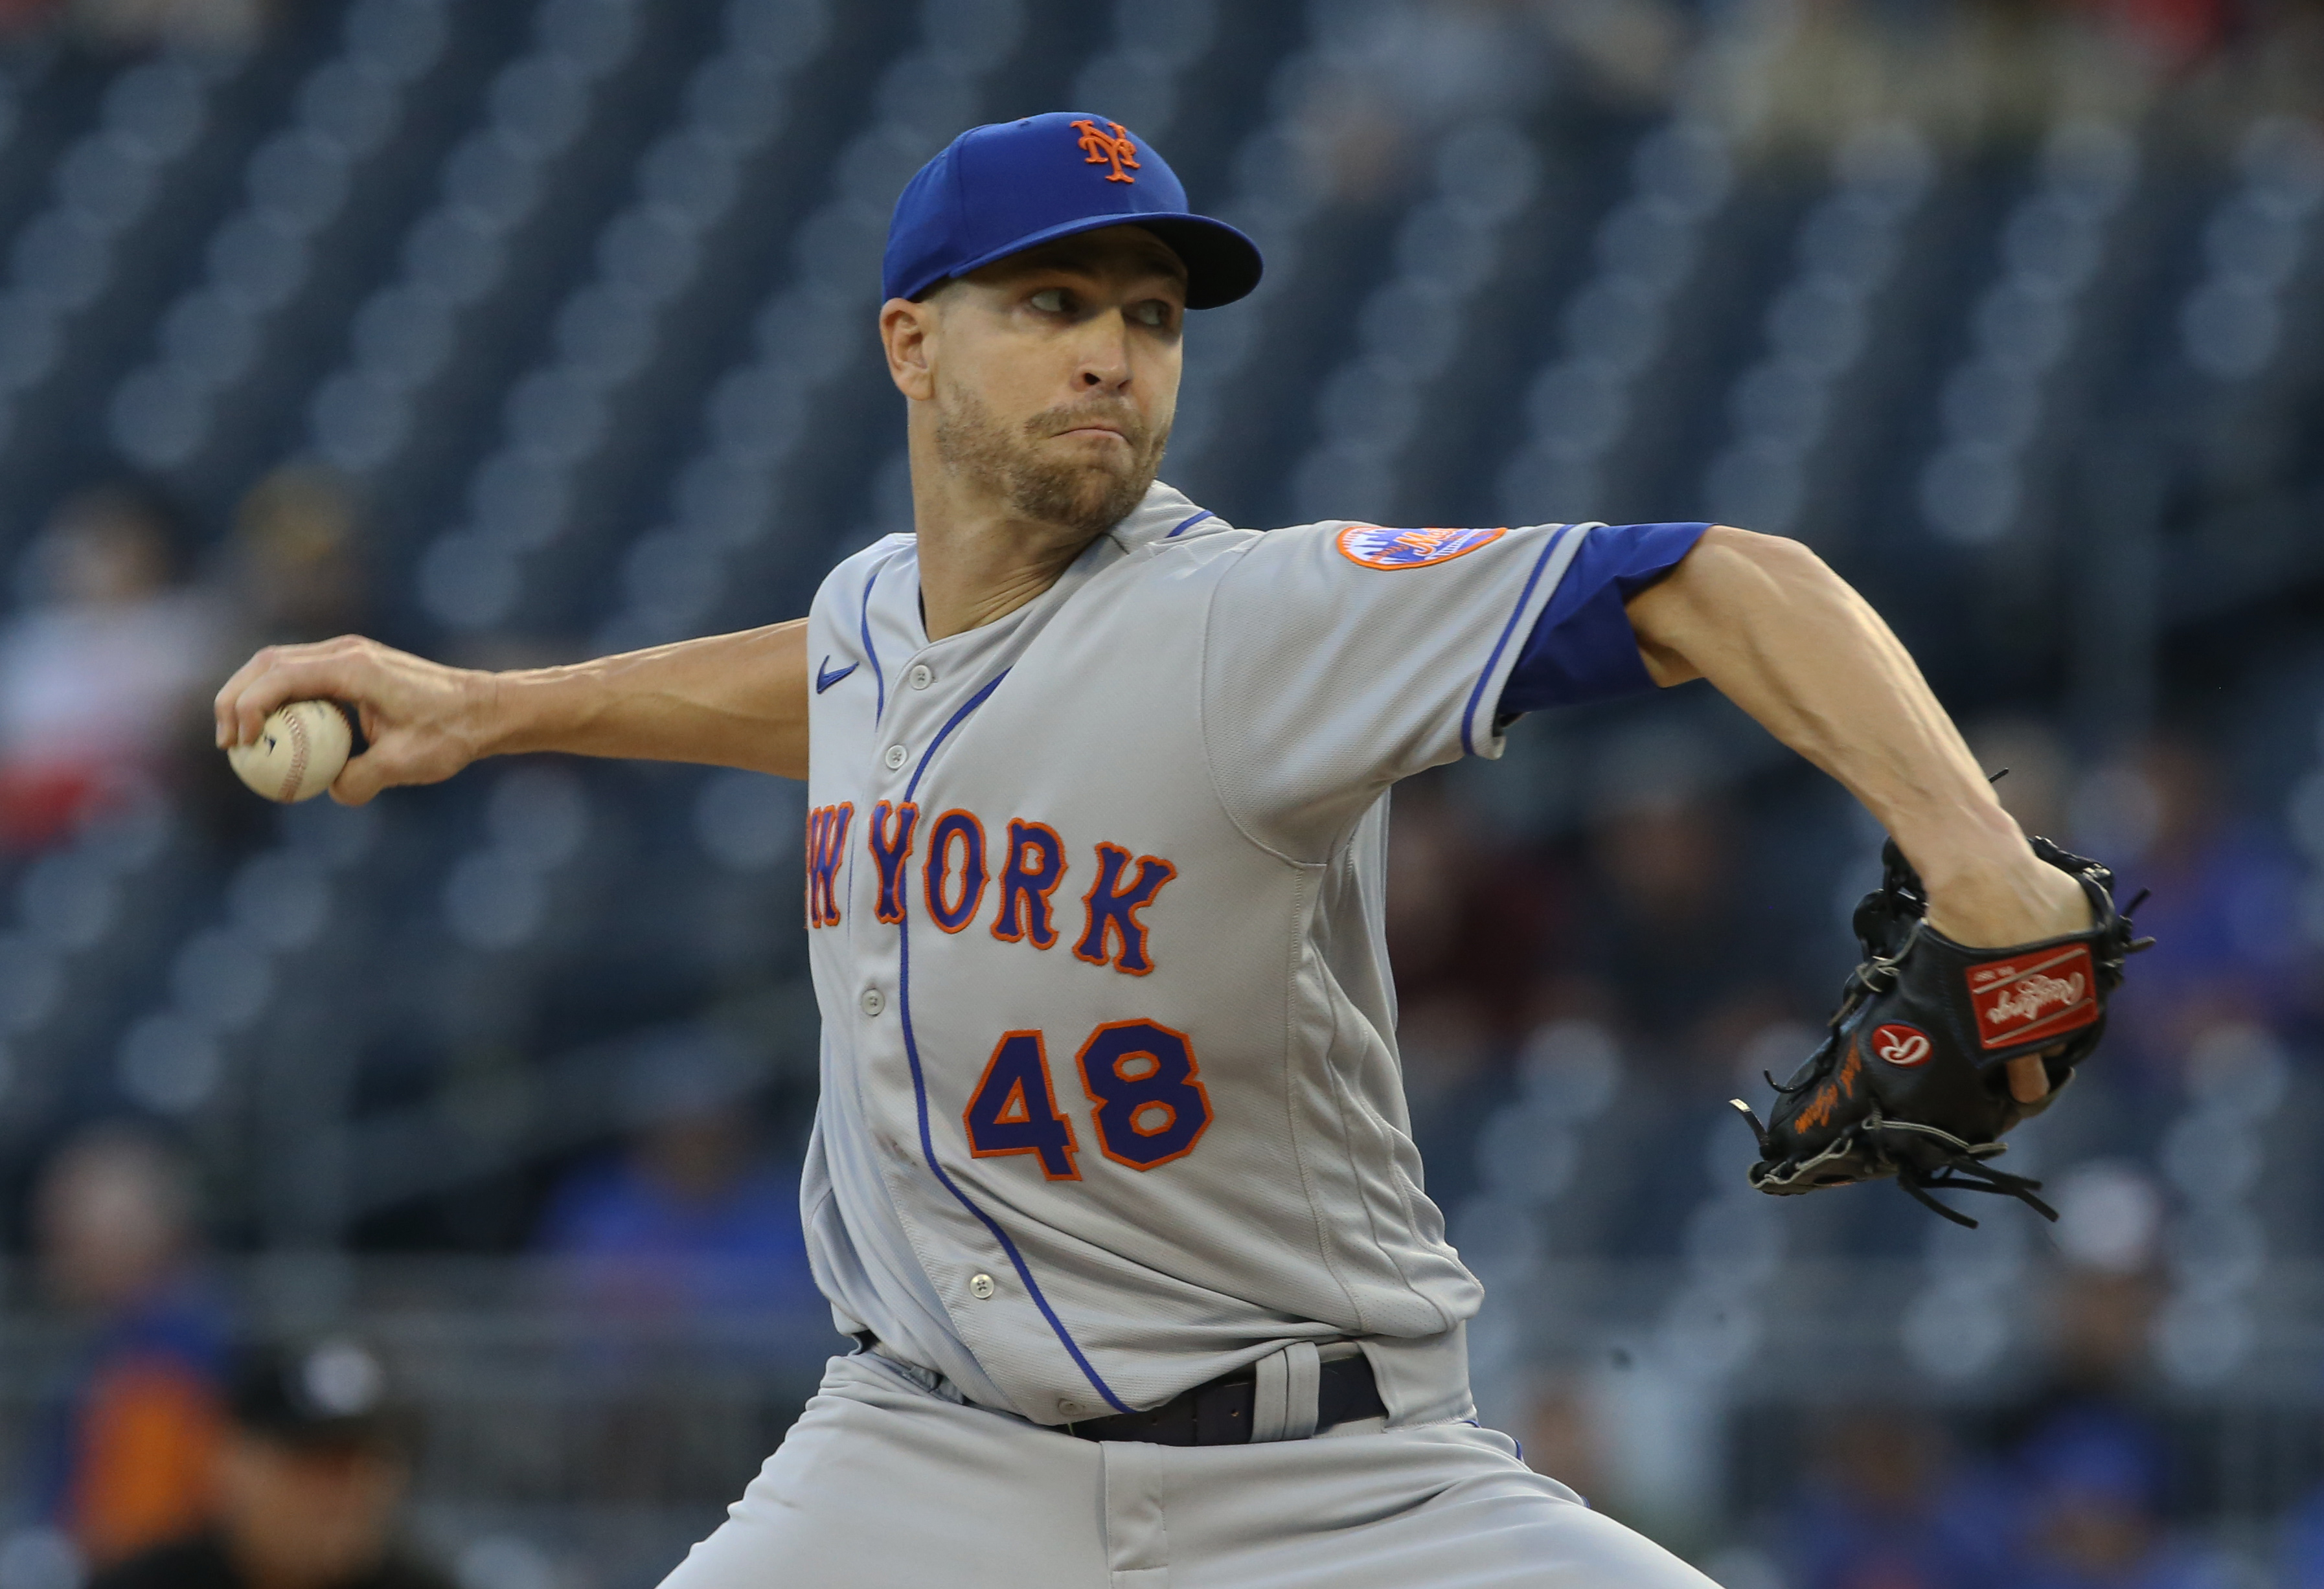 MLB Insider Identifies AL West Team as Potential Jacob deGrom Suitor